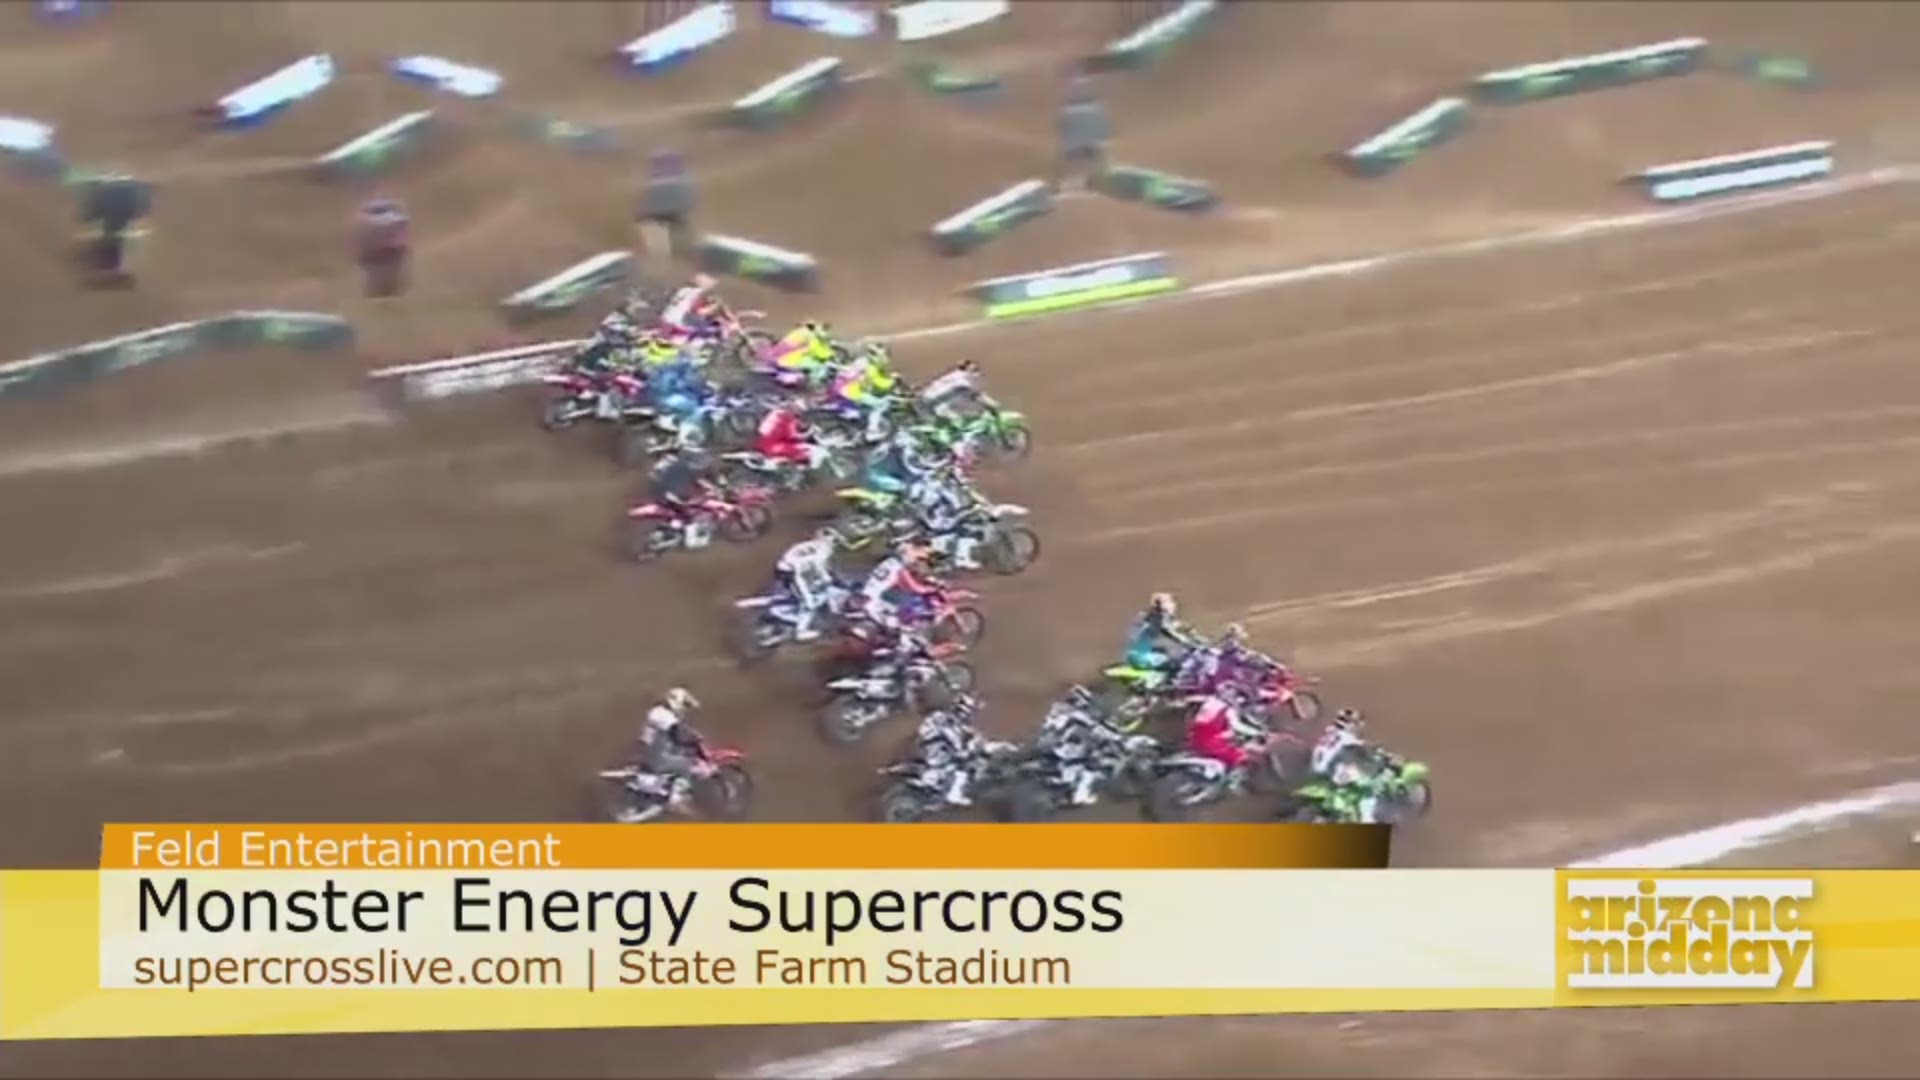 Monster Energy Supercross returns to State Farm Stadium this weekend. Supercross star Deven Raper gave us a sneak peek at what to expect.